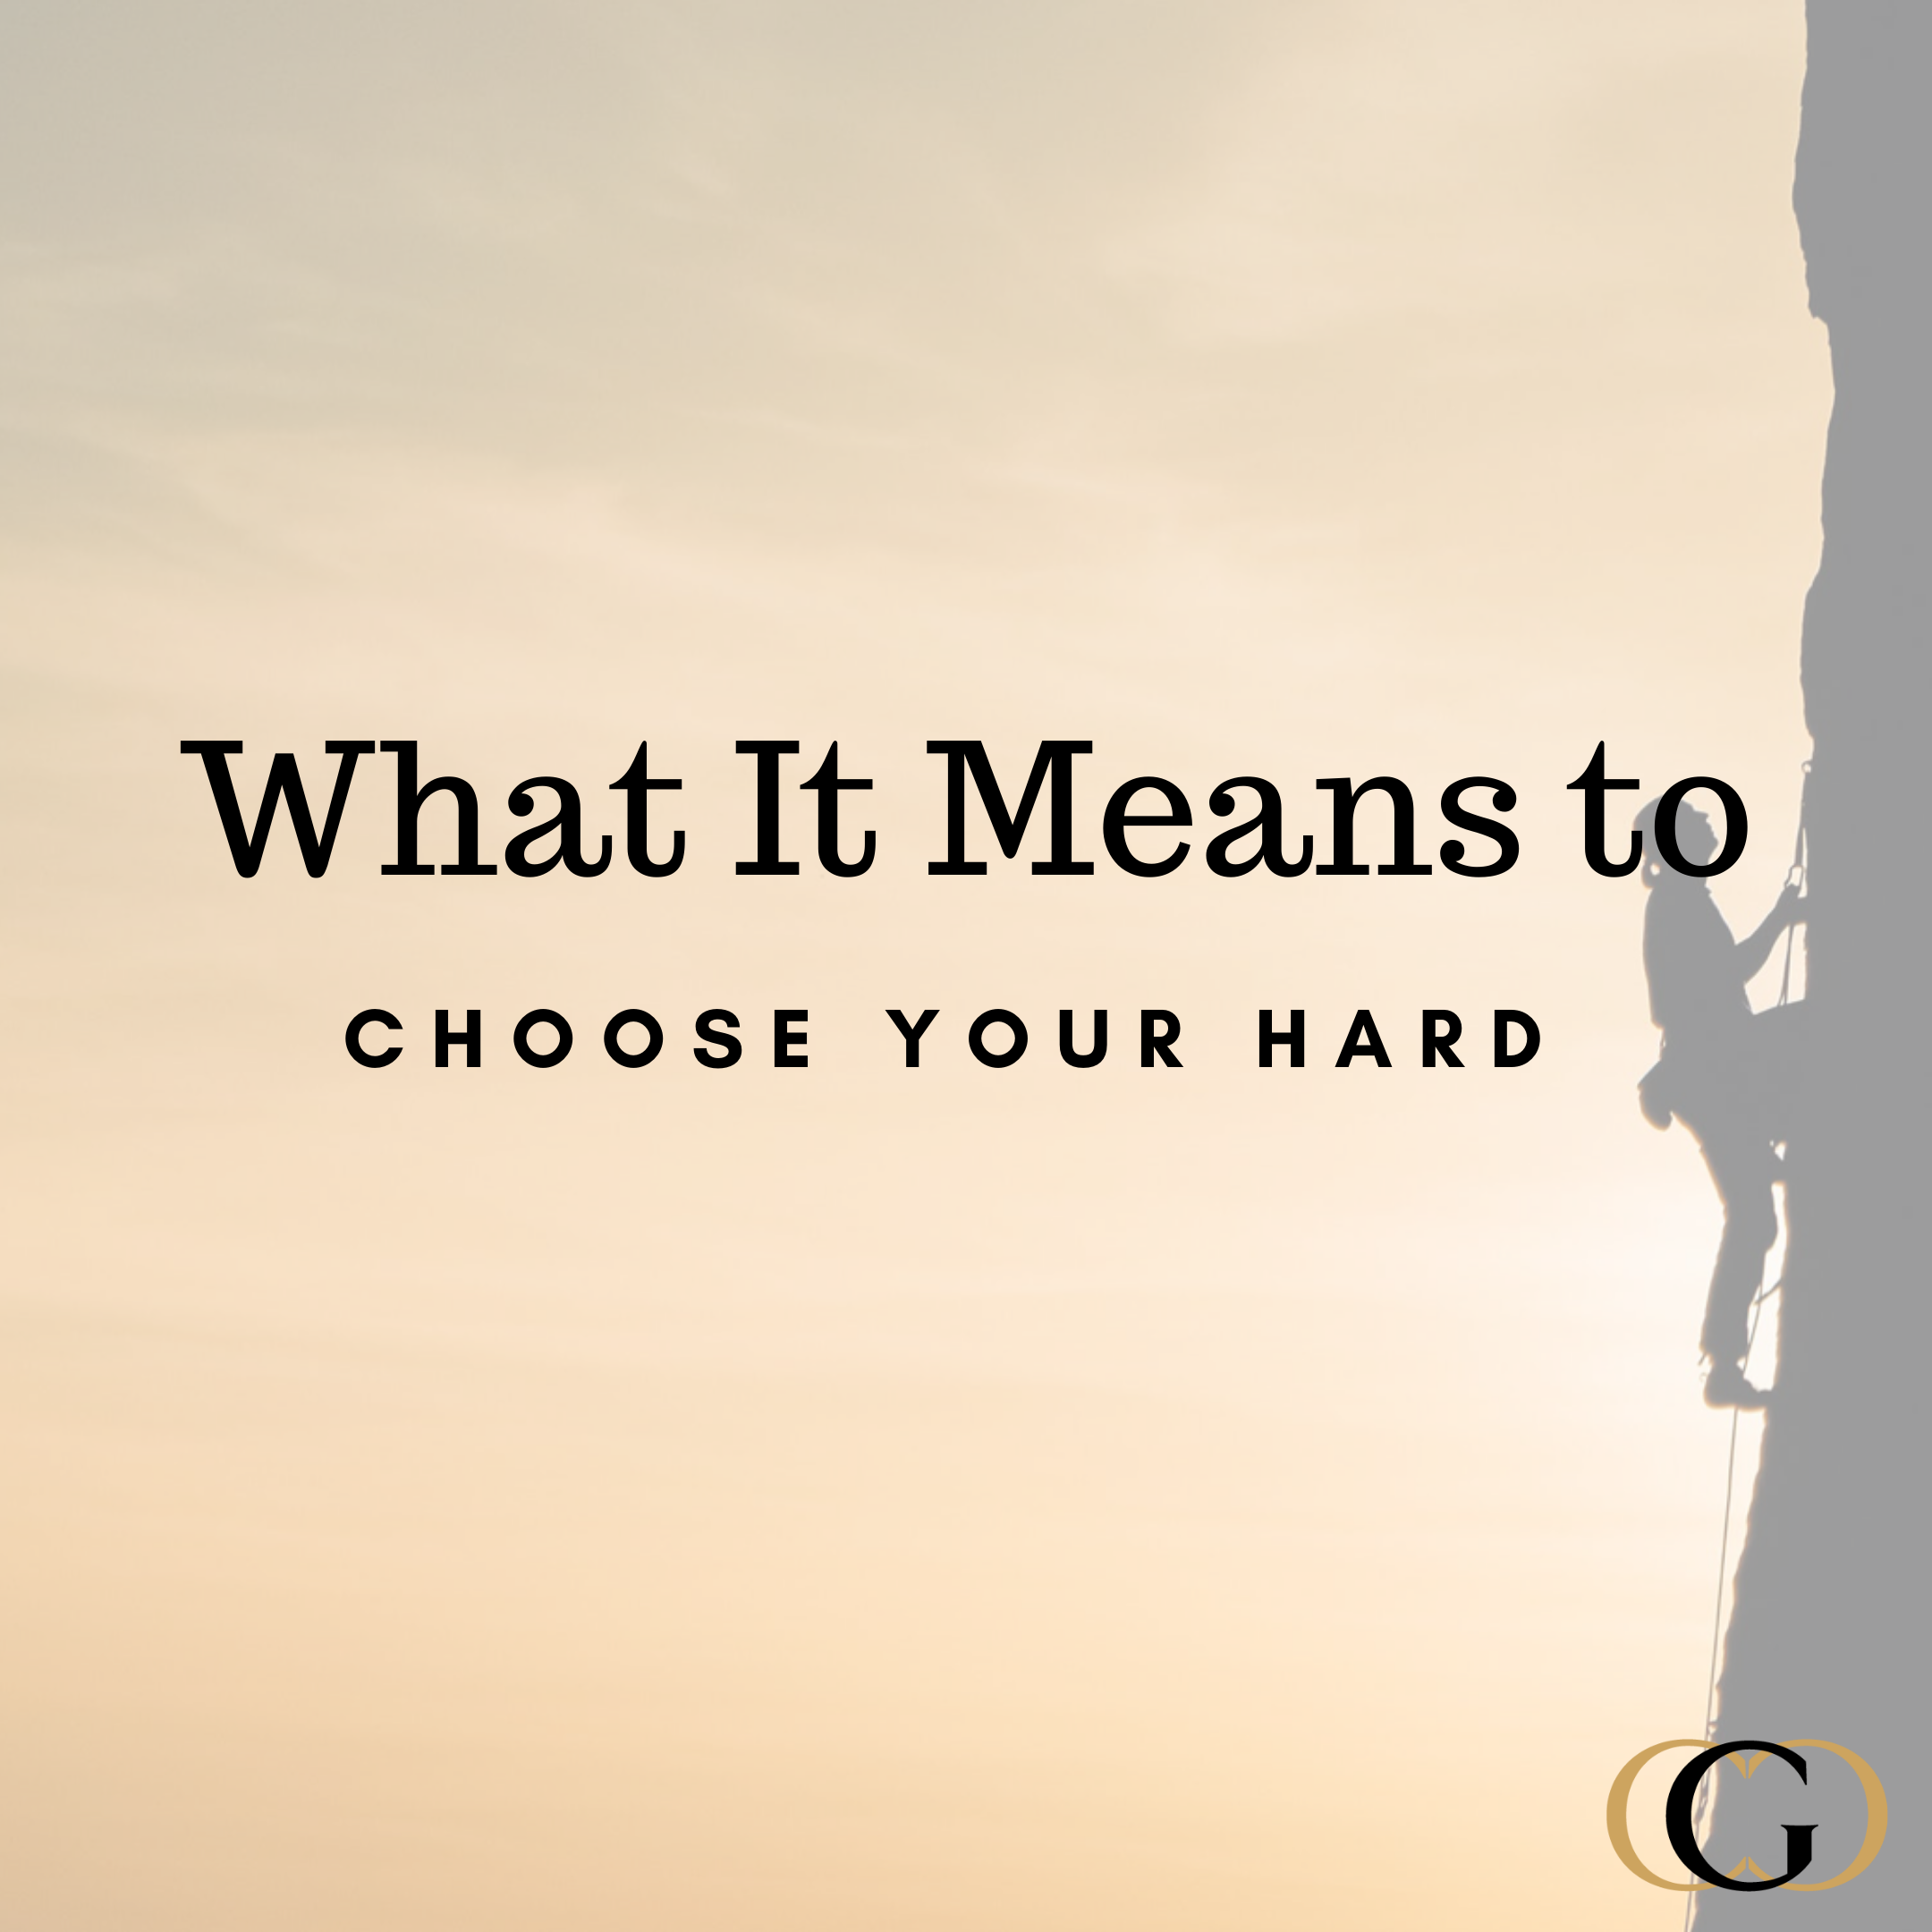 What it Means to Choose Your Hard